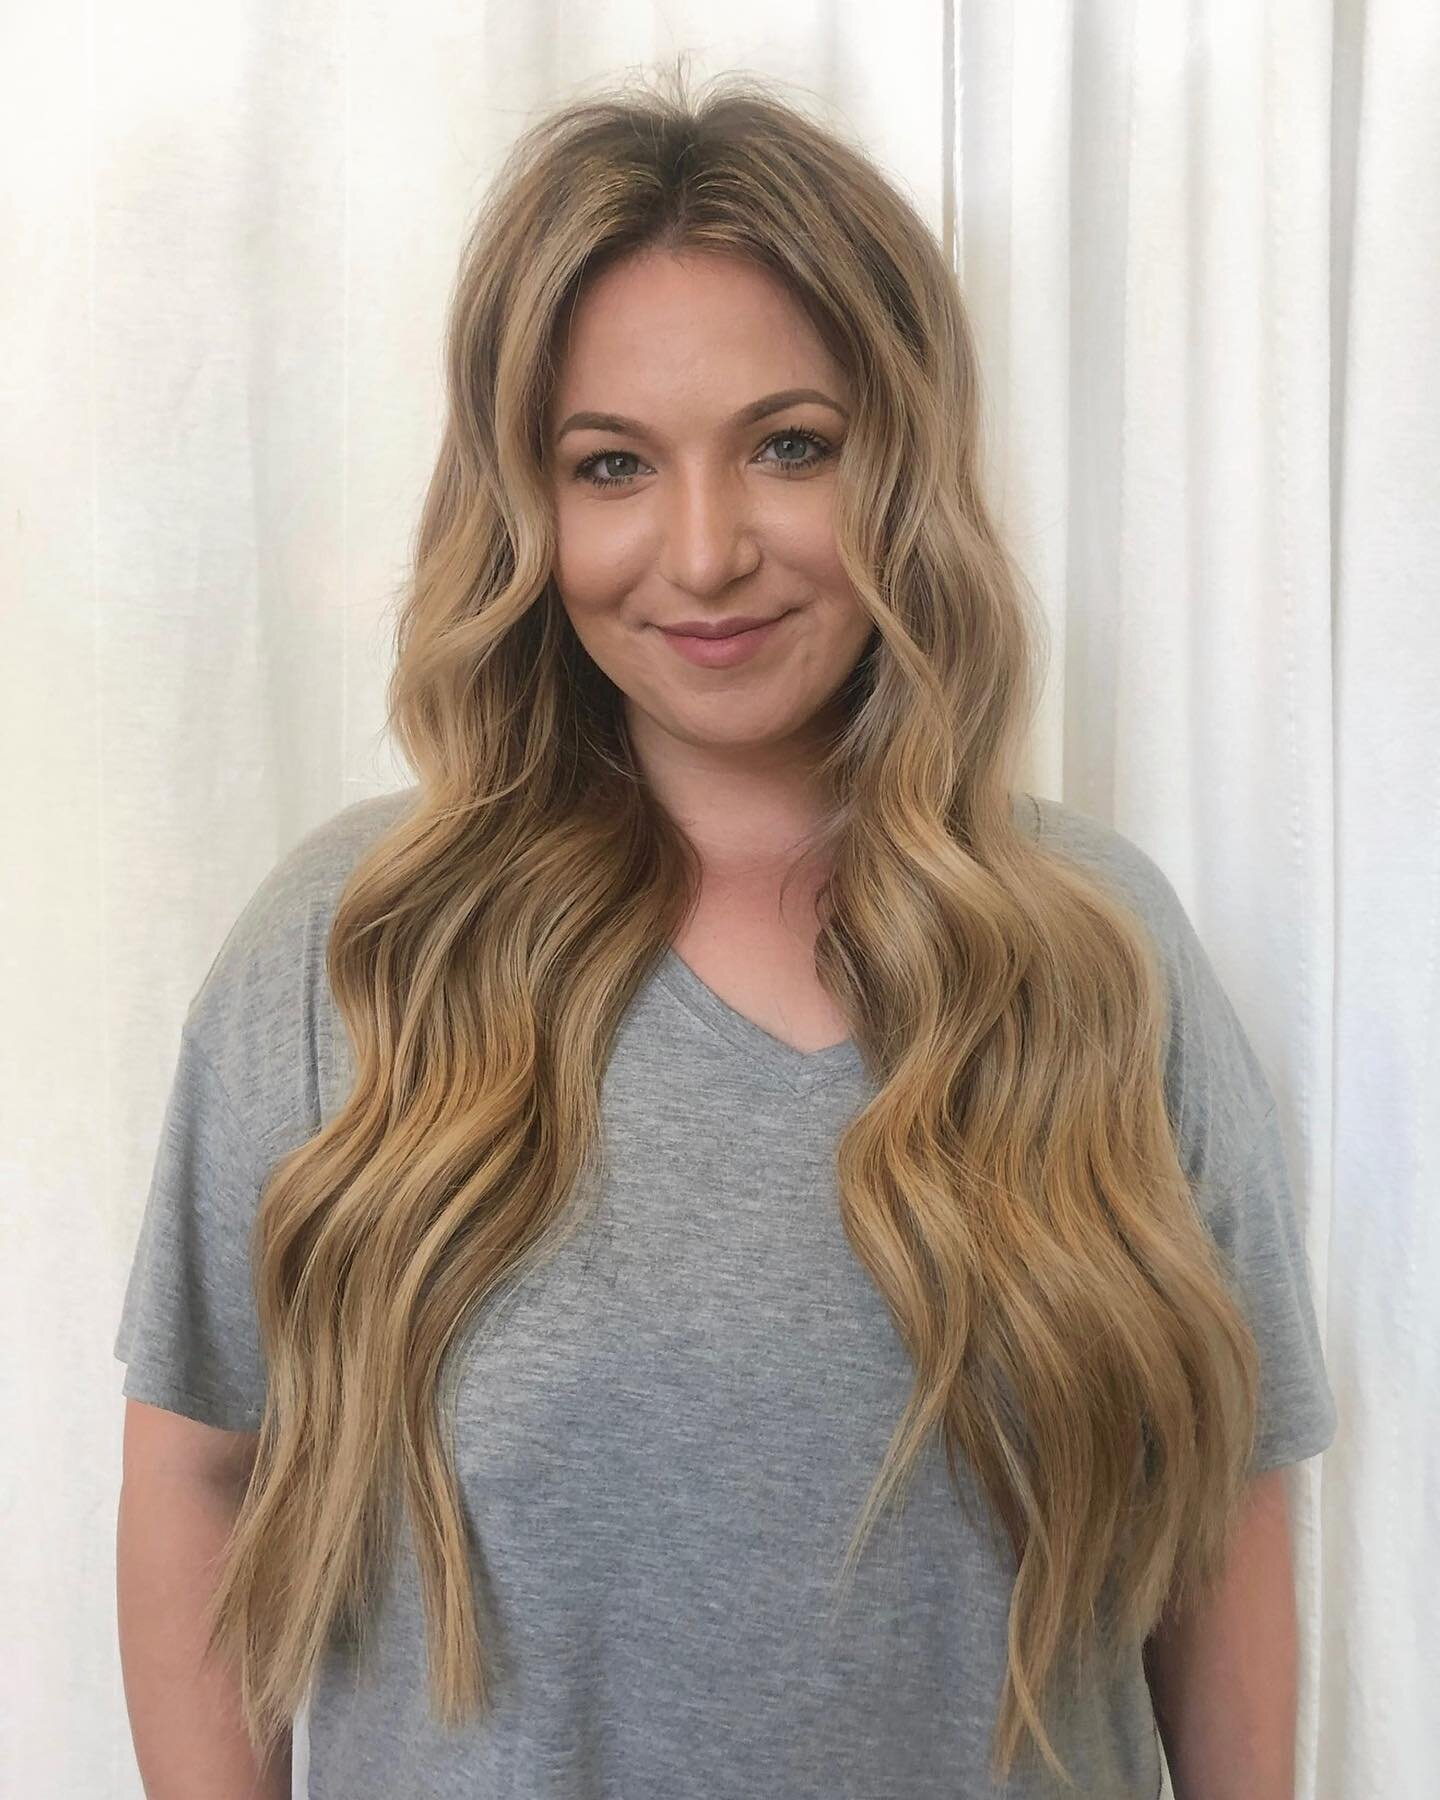 Added length, volume, and a pop of color in all the right places 🤍 swipe to see the before!

2 rows + 10 wefts of @trusthairco and @invisiblebeadextensions 

Hair by: @katelynellsworth_hair 

.

#theroslyn #sandiegohair #sandiegohairstylist #sandieg